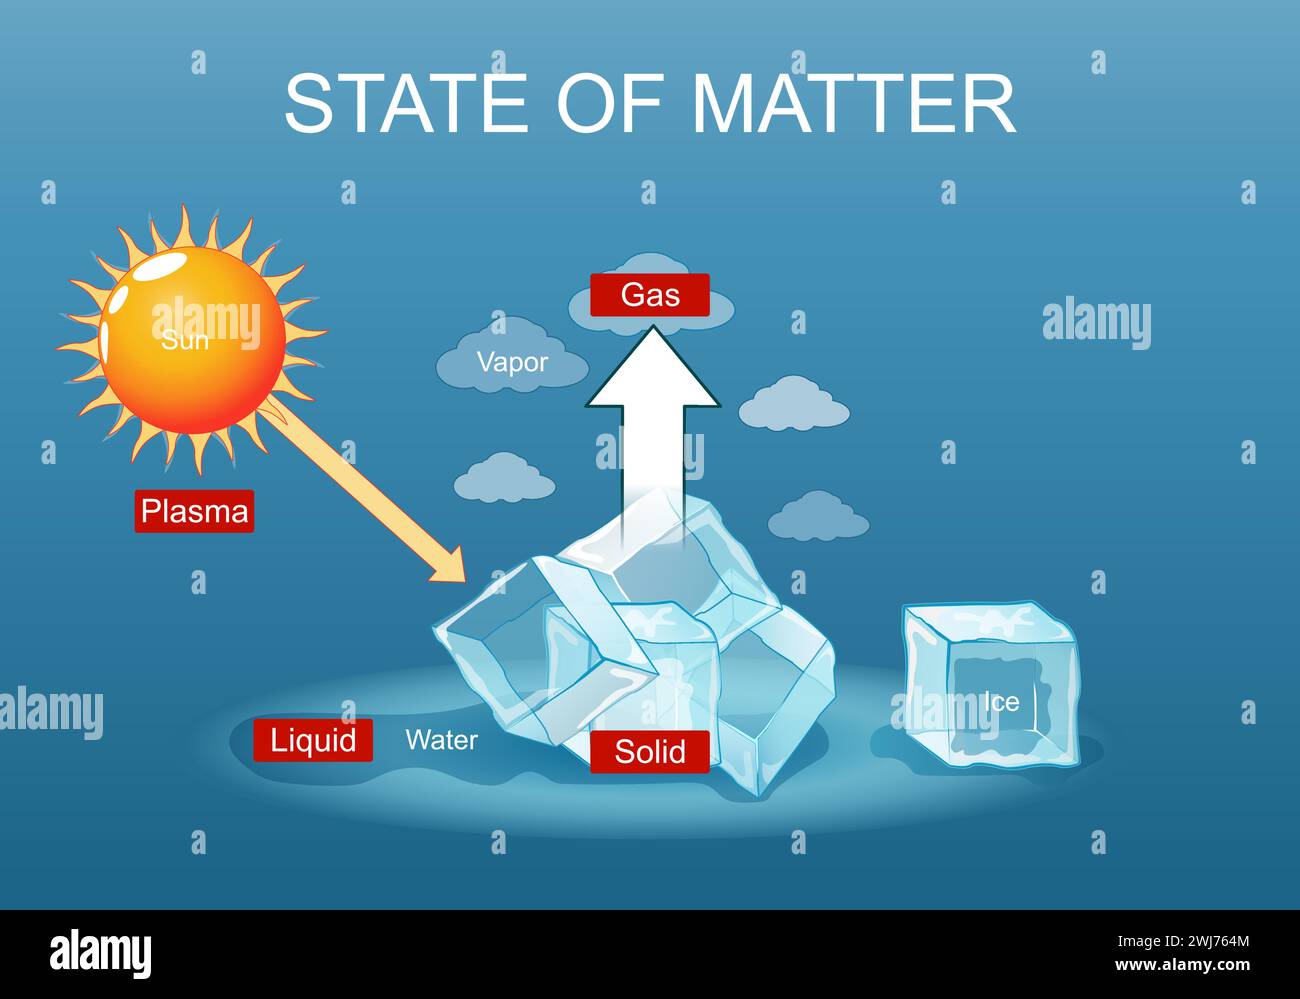 State of matter. Sun is Plasma, Vapor is Gas, Water is Liquid, and Solid is ice.  Poster for Elementary Education Physics or chemistry. Physical law. Stock Vector